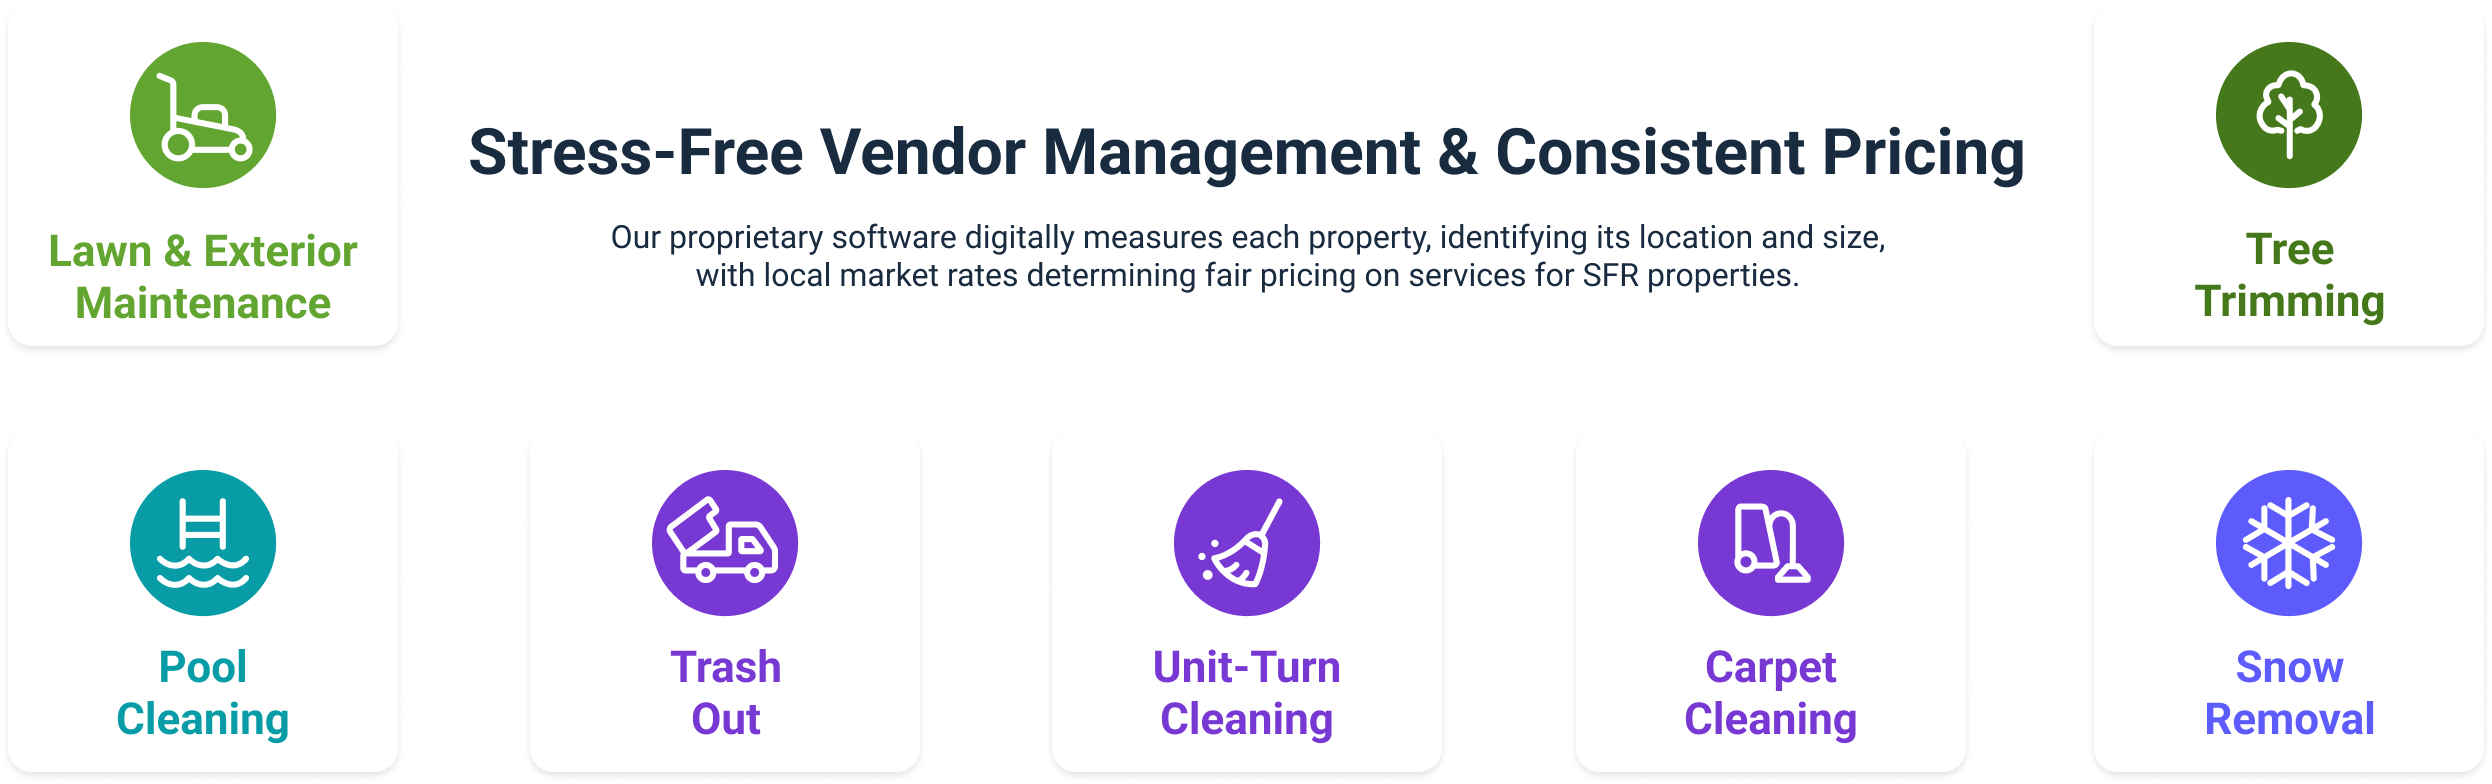 stress-free vendor management and consistent pricing